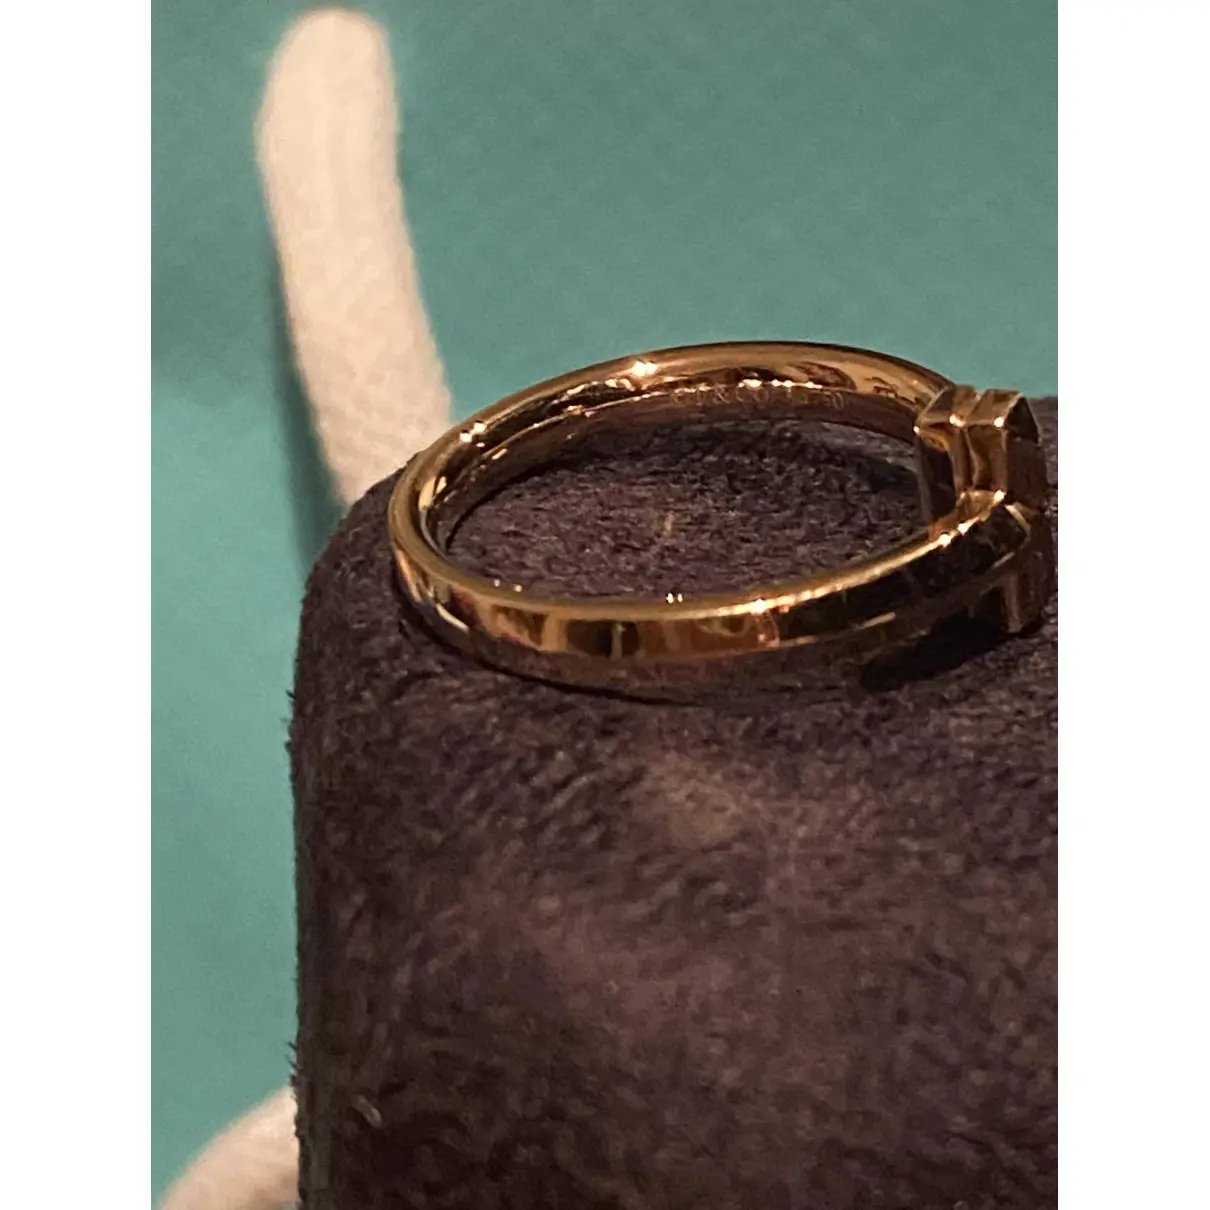 Buy Tiffany & Co Tiffany T pink gold ring online